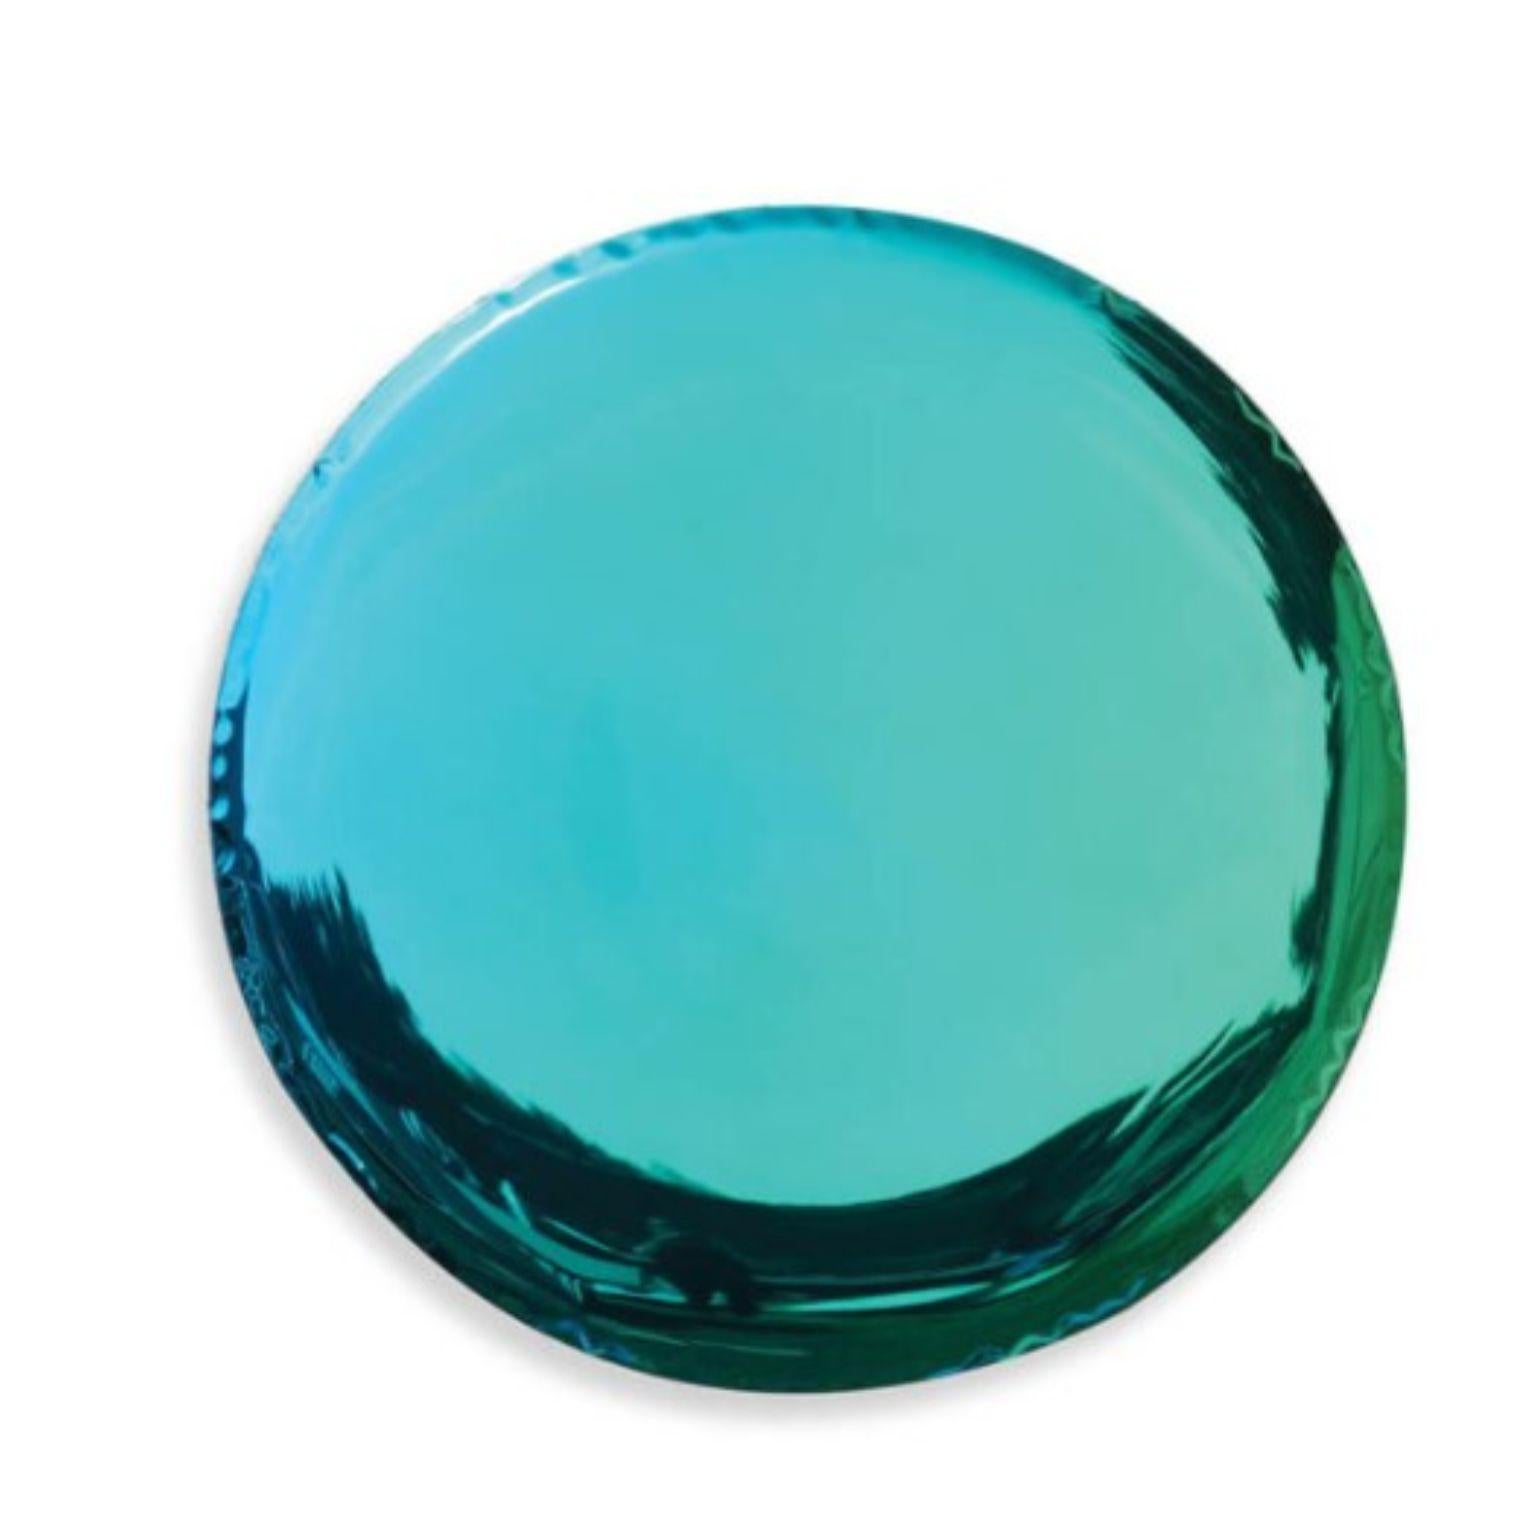 Emerald sapphire Oko 75 sculptural wall mirror by Zieta
Dimensions: Diameter 75 x Deep 6 cm 
Material: Stainless steel. 
Finish: Sapphire/emerald.
Available in finishes: stainless steel, deep space blue, emerald, sapphire, sapphire/emerald, dark